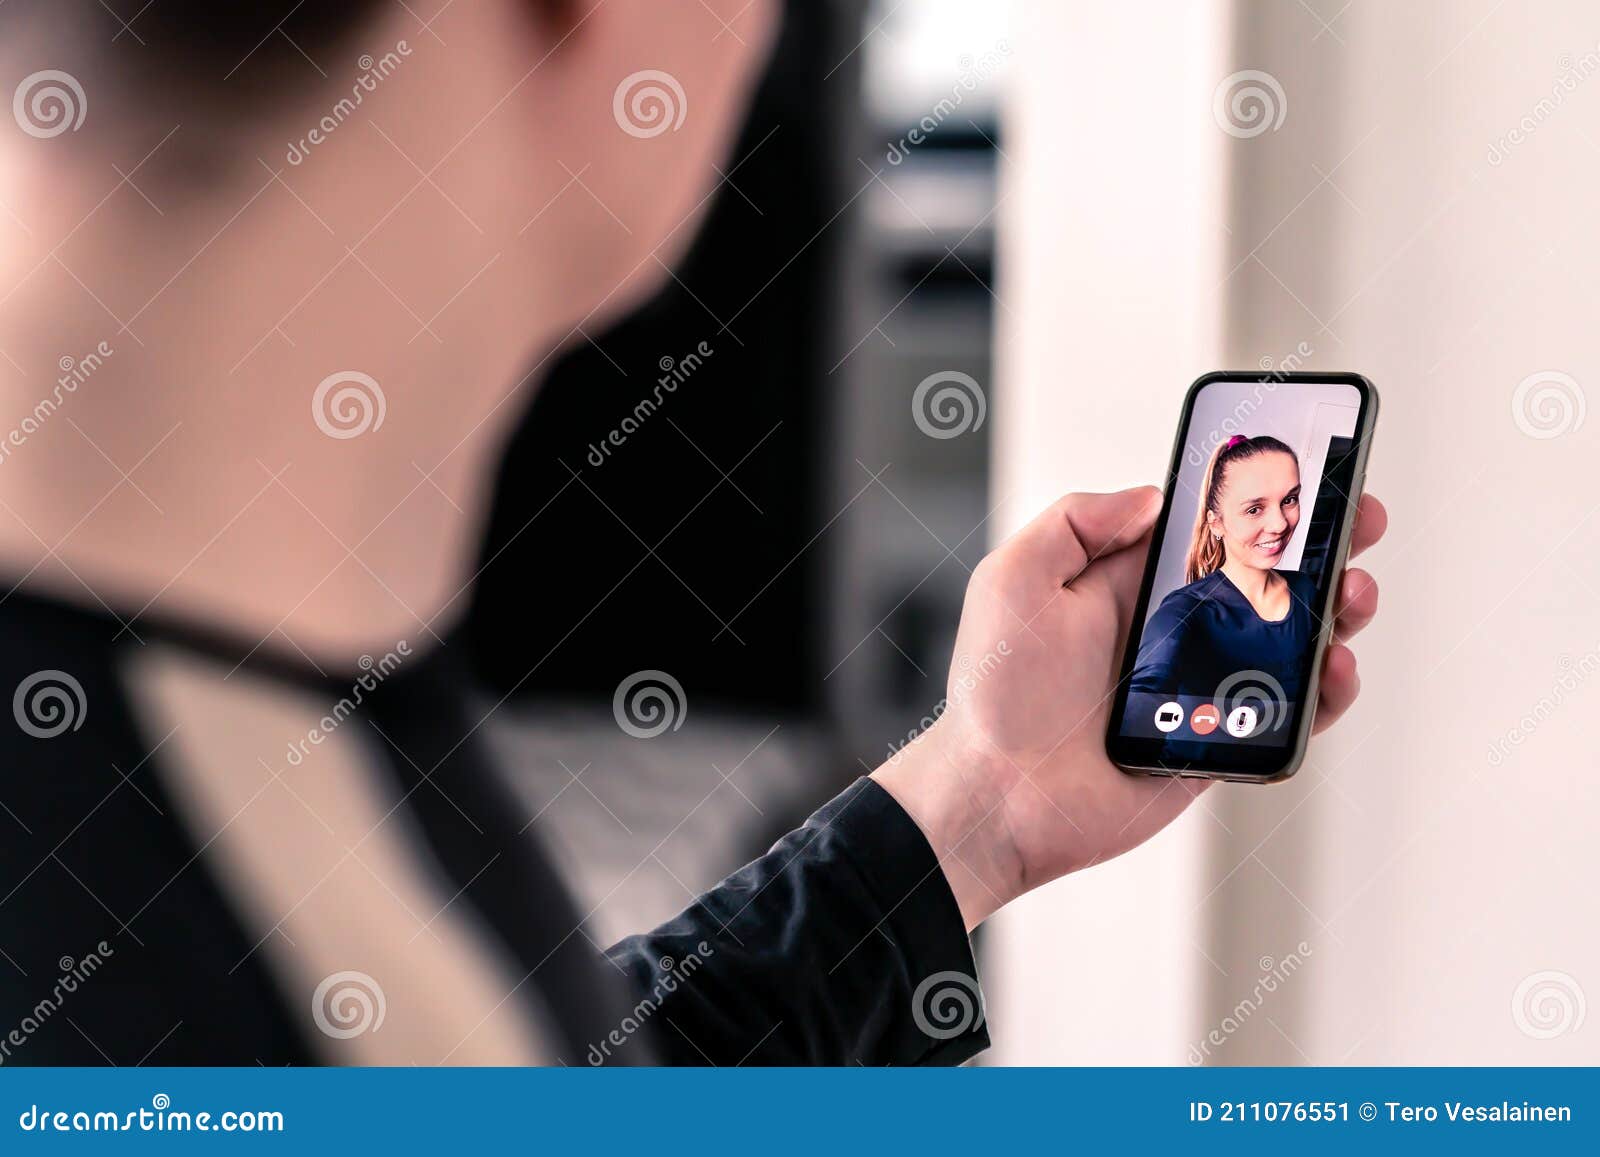 Video chat with women